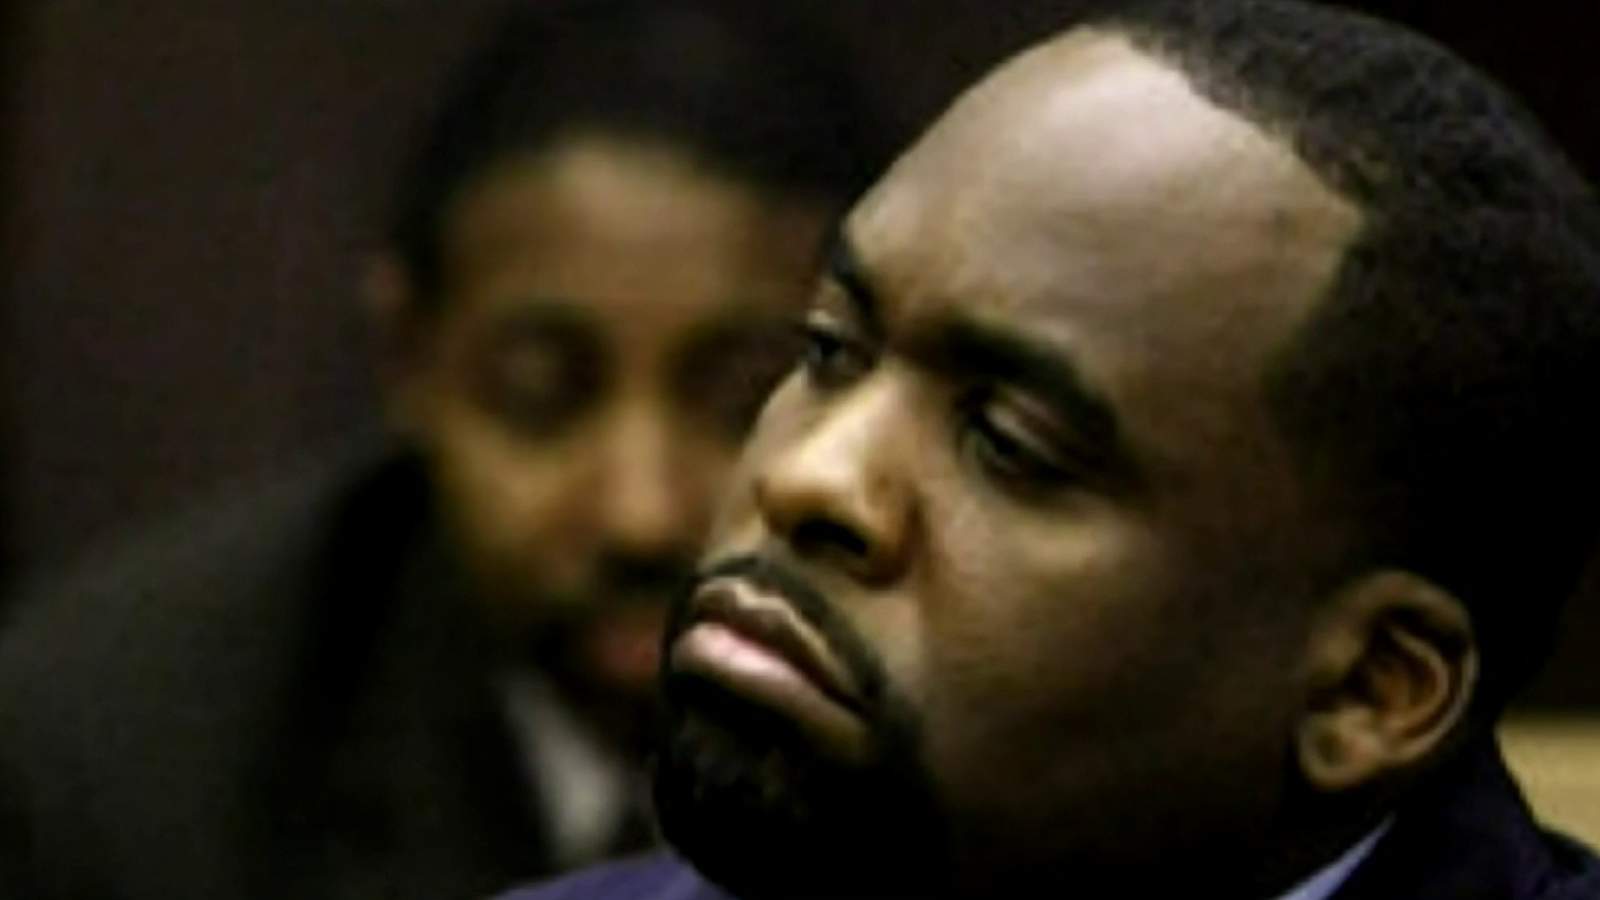 Kwame Kilpatrick’s release brings back painful memories for former Detroit assistant chief